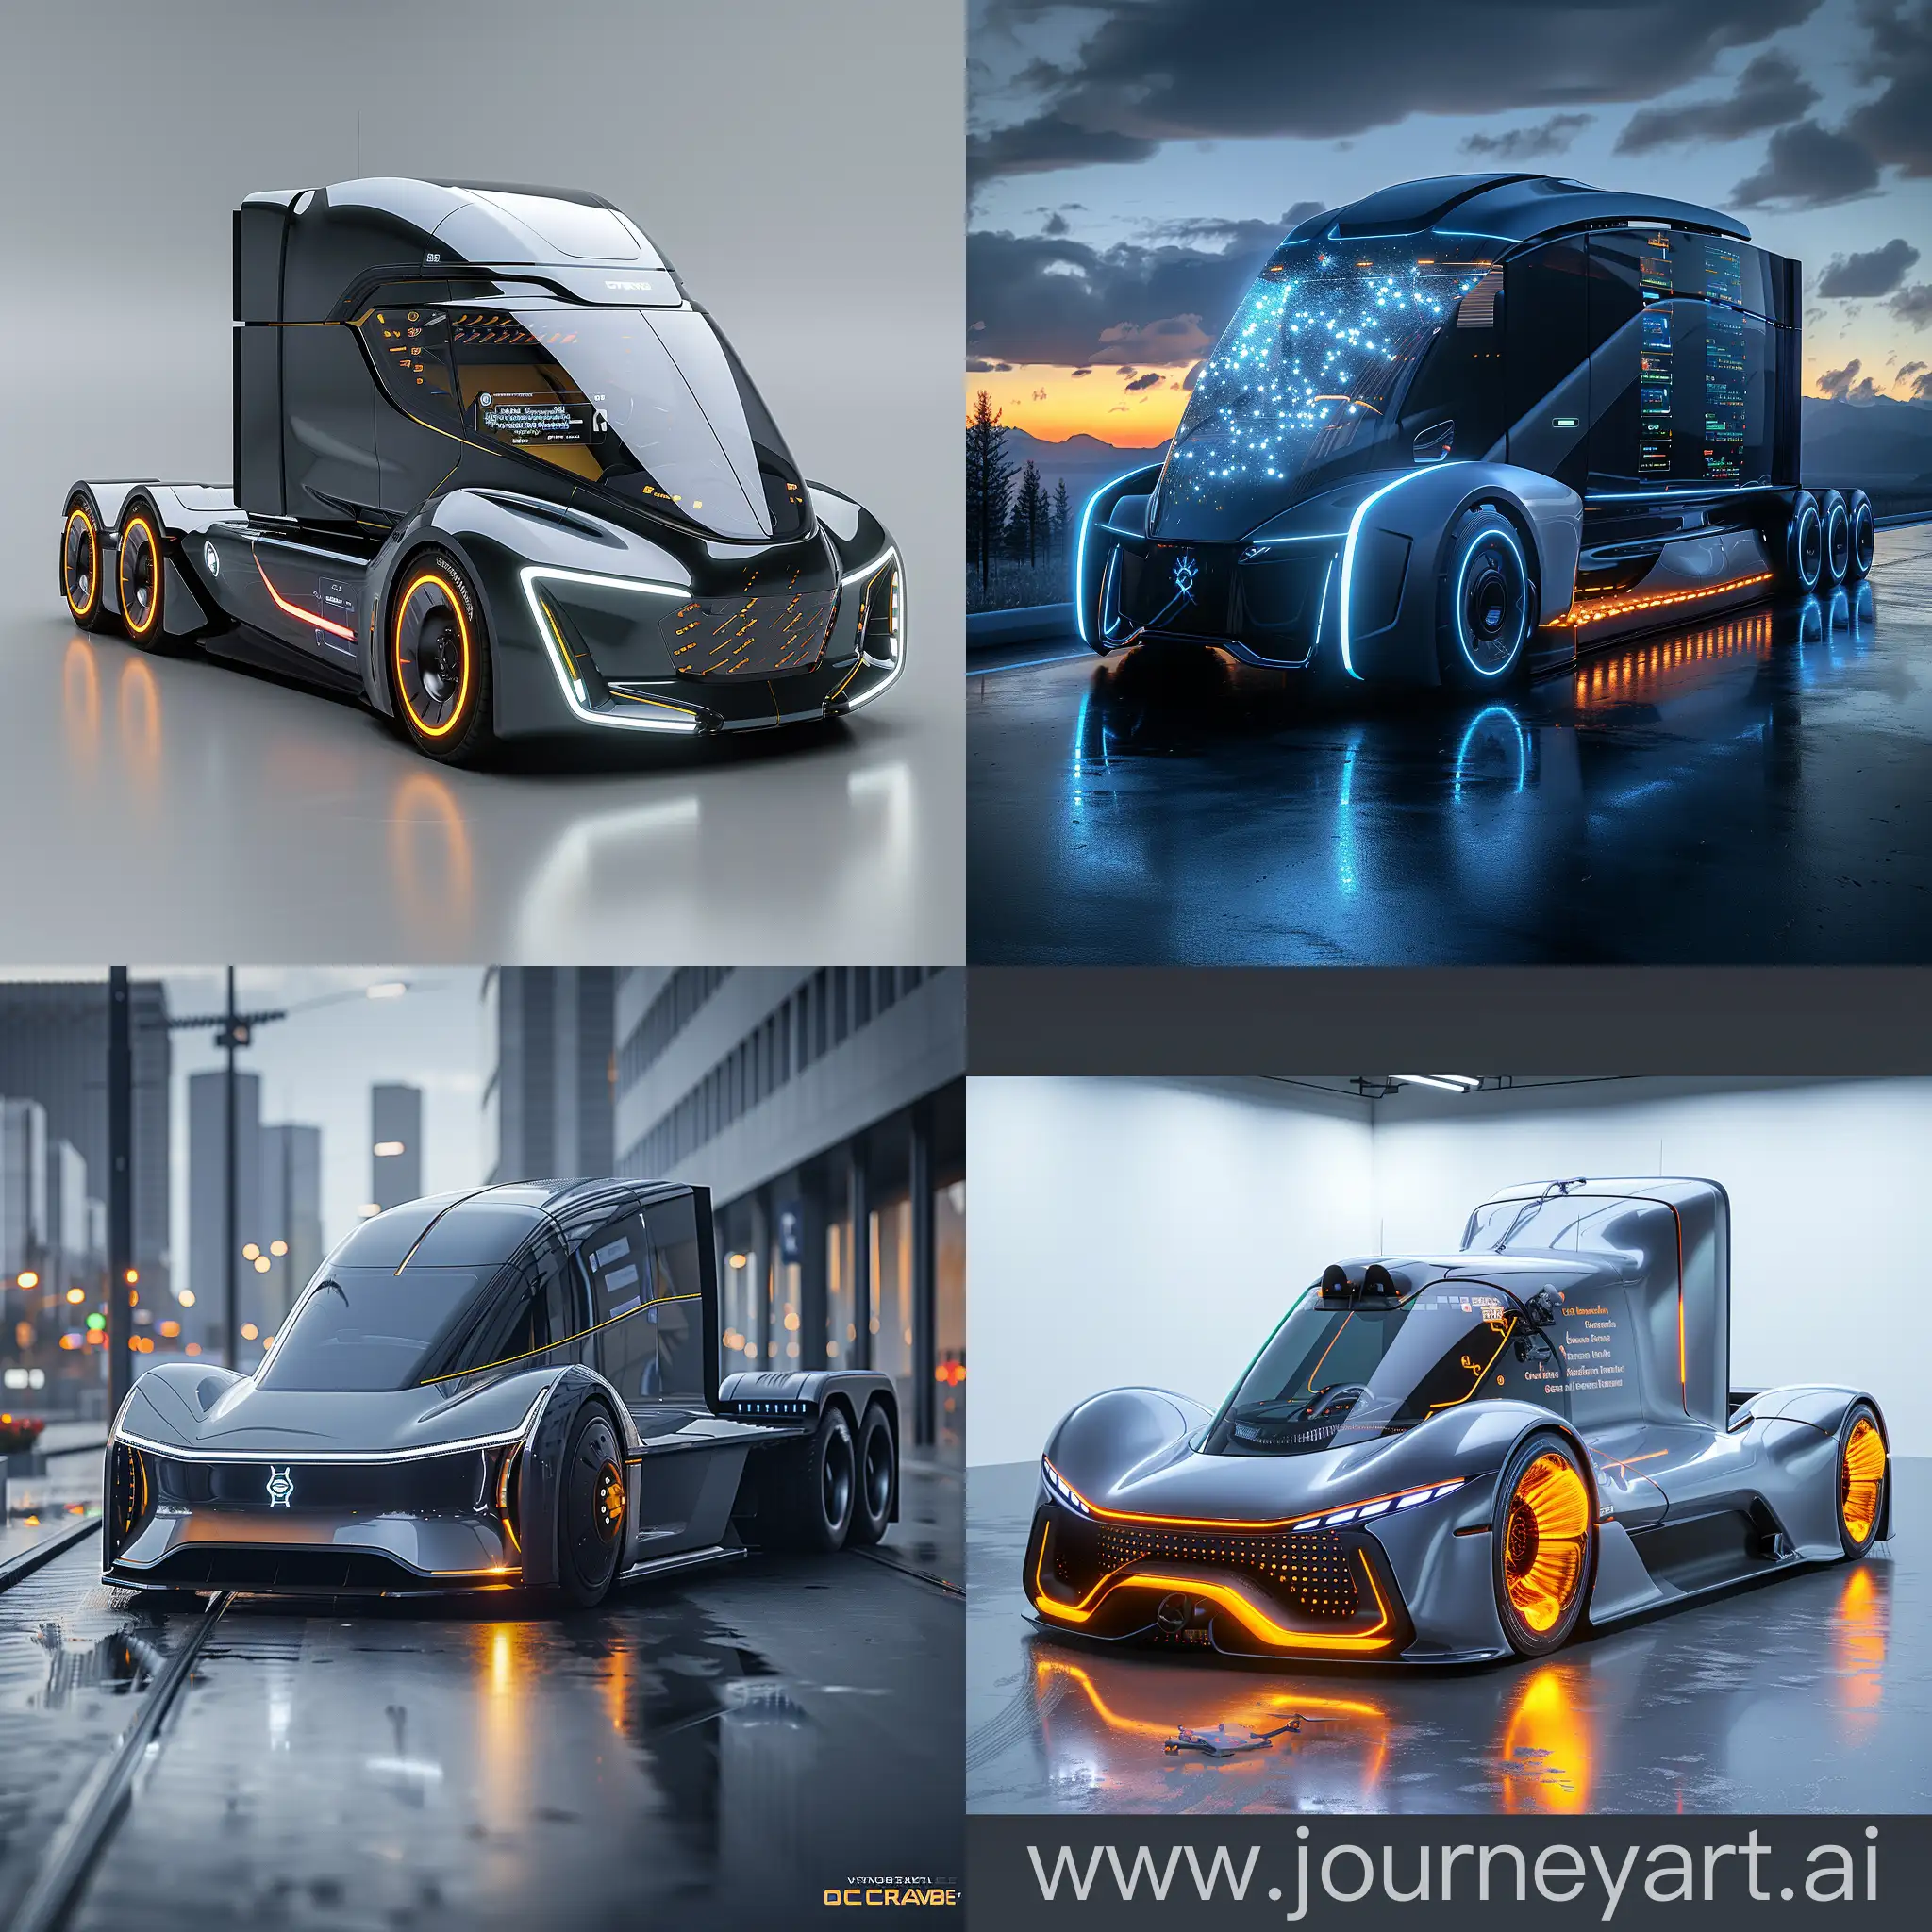 Futuristic truck, Autonomous Driving, Electric Powertrain, Advanced Connectivity, Biometric Security, Augmented Reality Windshield, Self-Healing Tires, Cargo Drone Integration, Adaptive Aerodynamics, Holographic Dashboard, Energy-Generating Panels, Regenerative Braking, Recycled Materials, Efficient LED Lighting, Low-Rolling Resistance Tires, Aerodynamic Design, Electric HVAC Systems, Plant-Based Interior Materials, Eco-Mode Driving, Telematics Systems, Carbon Offset Programs, Reinforced Cab Structure, Advanced Airbag System, Collision Avoidance System, Roll-Over Protection, Side-Impact Protection, Crash-Resistant Glass, Emergency Brake Assist, Adaptive Cruise Control, Reinforced Bumpers, Emergency Communication System, octane render --stylize 1000